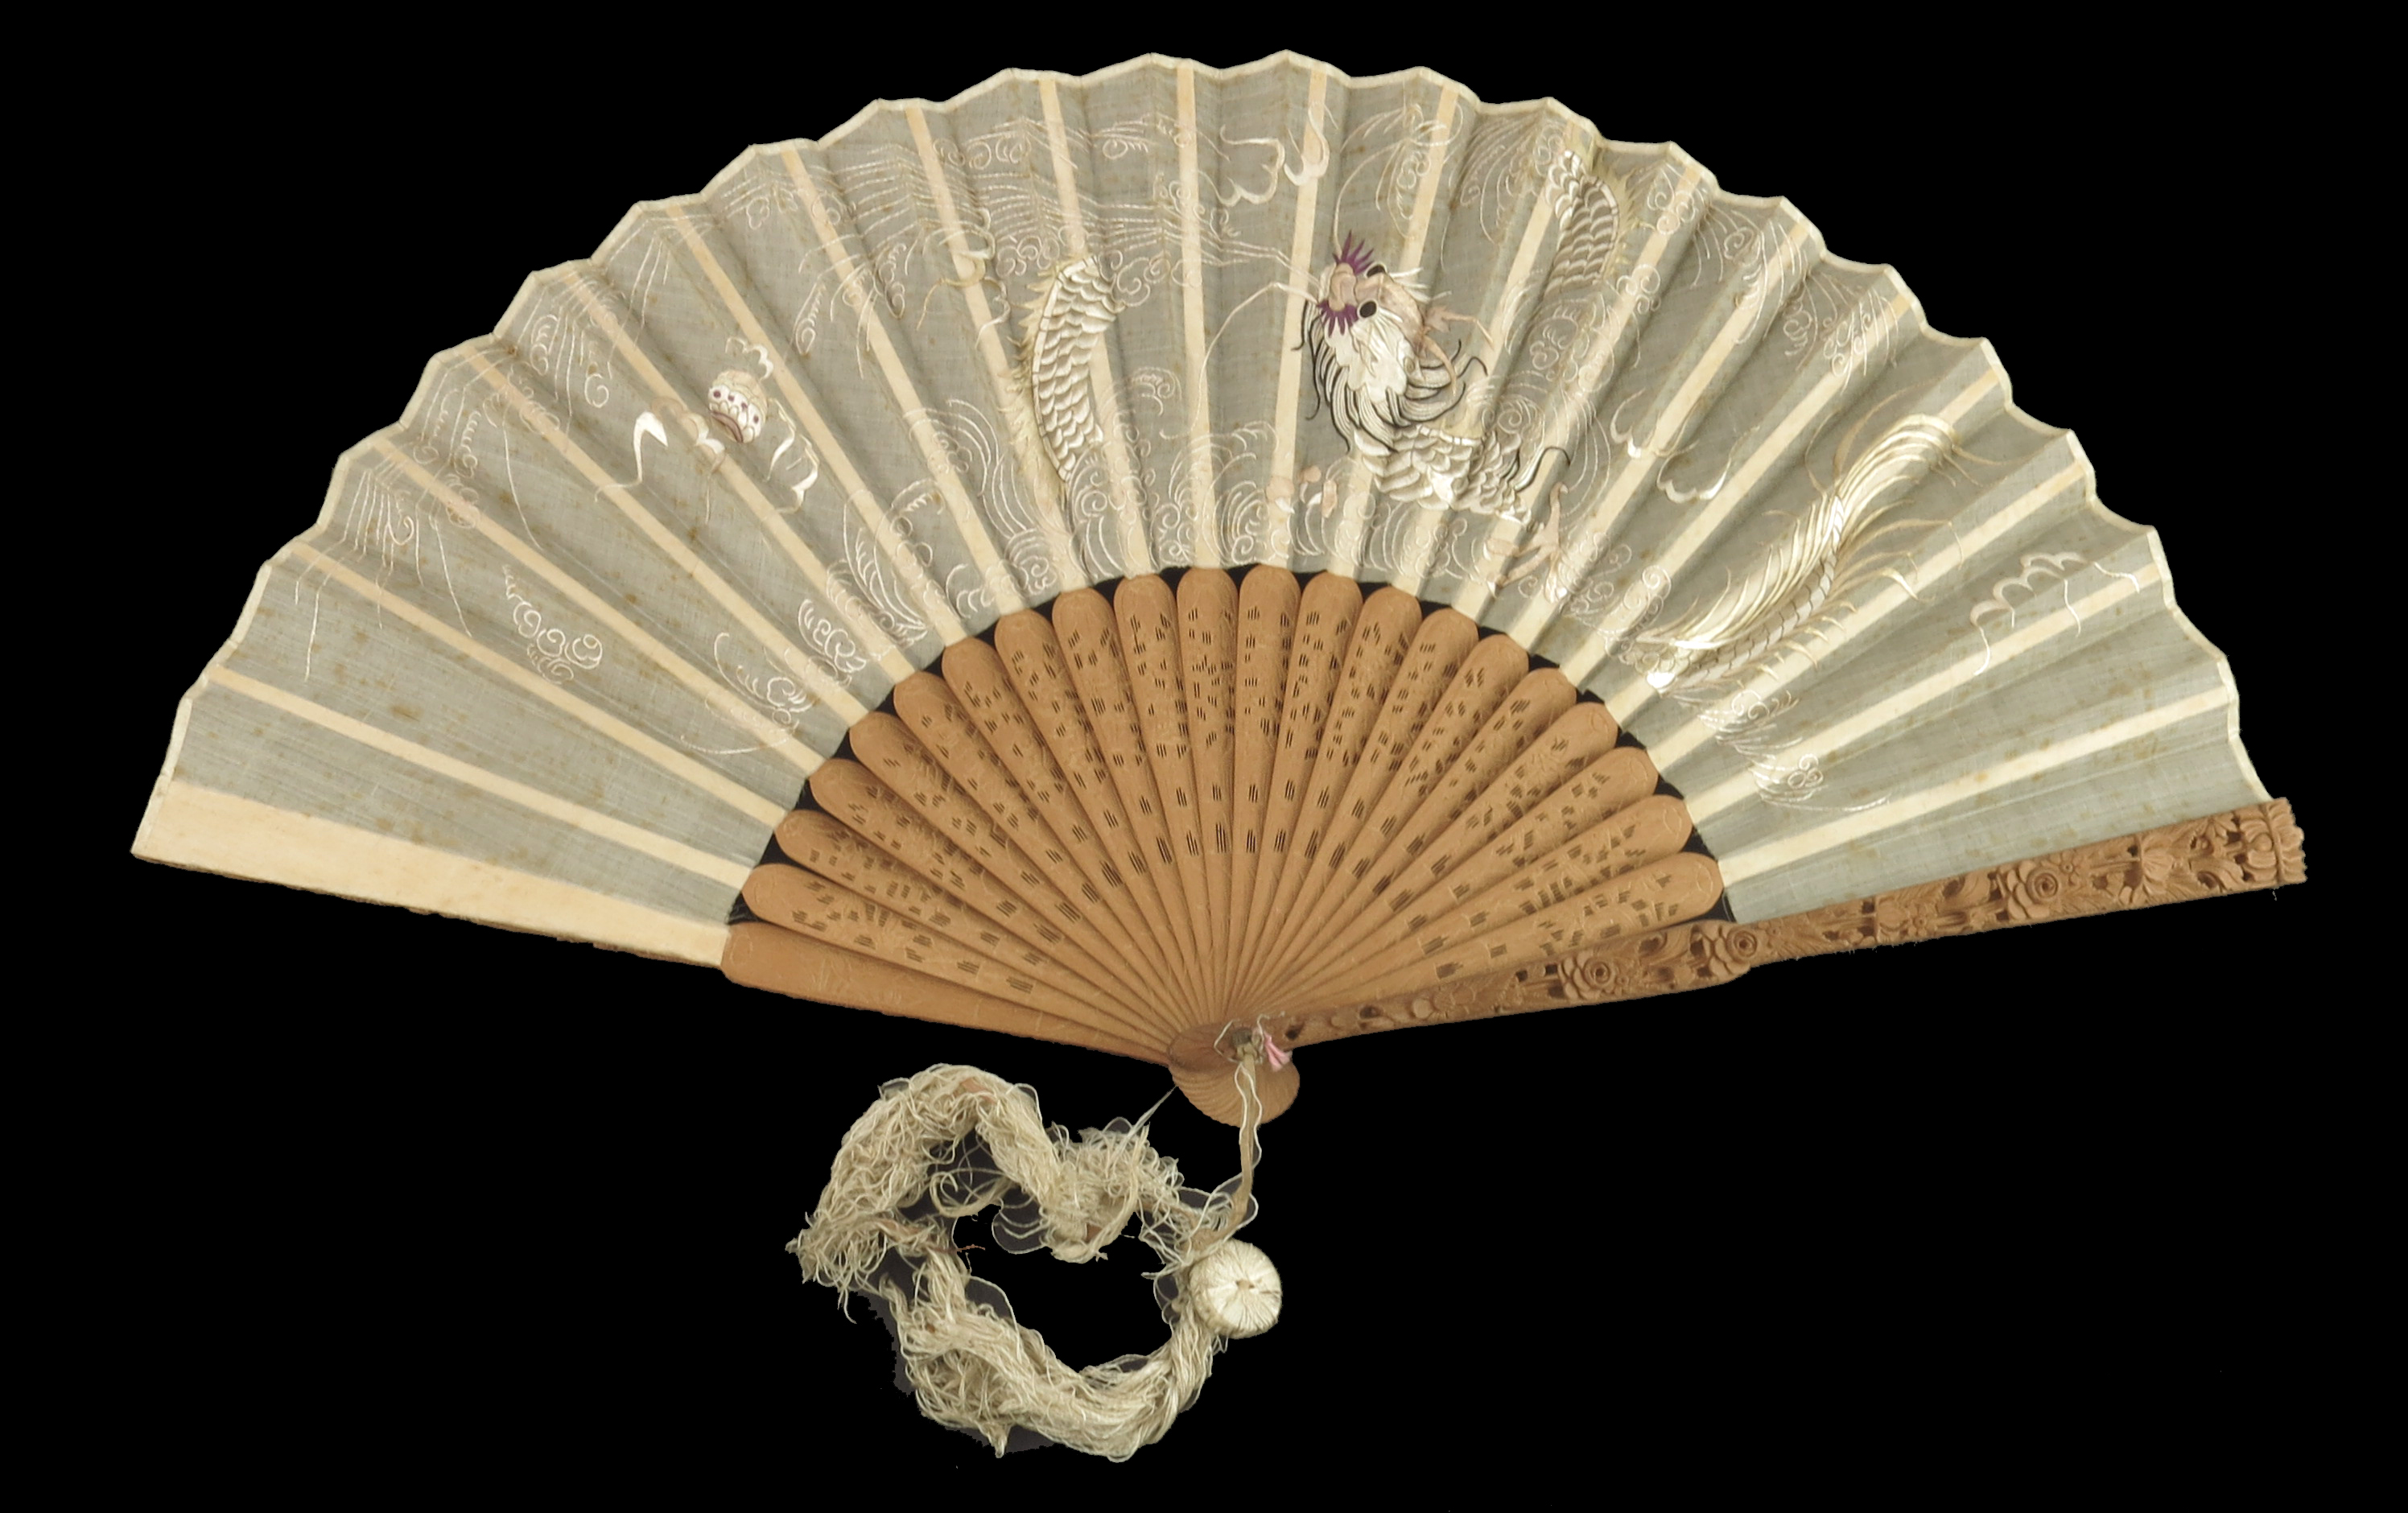 A 19th century Qing Dynasty Chinese fan with carved sandalwood monture, the guards both deeply carve